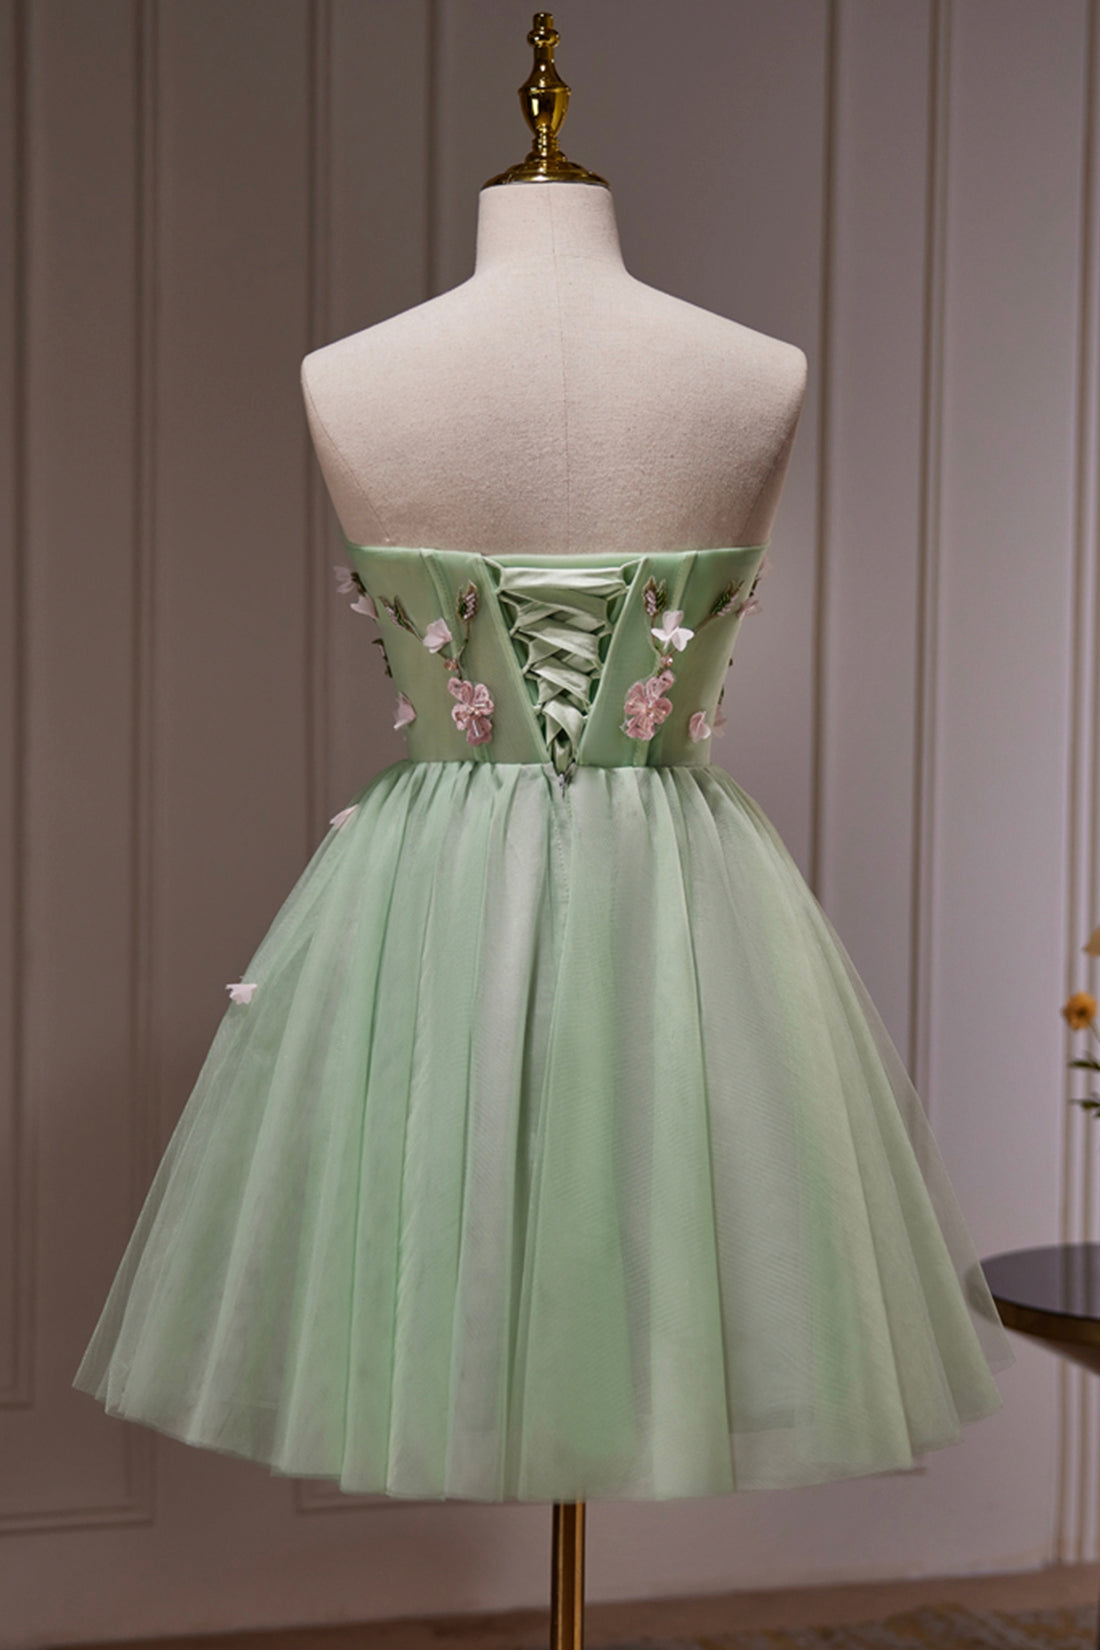 Party Dress Mini, Green Strapless Tulle Short Prom Dress with Lace, Green Party Dress